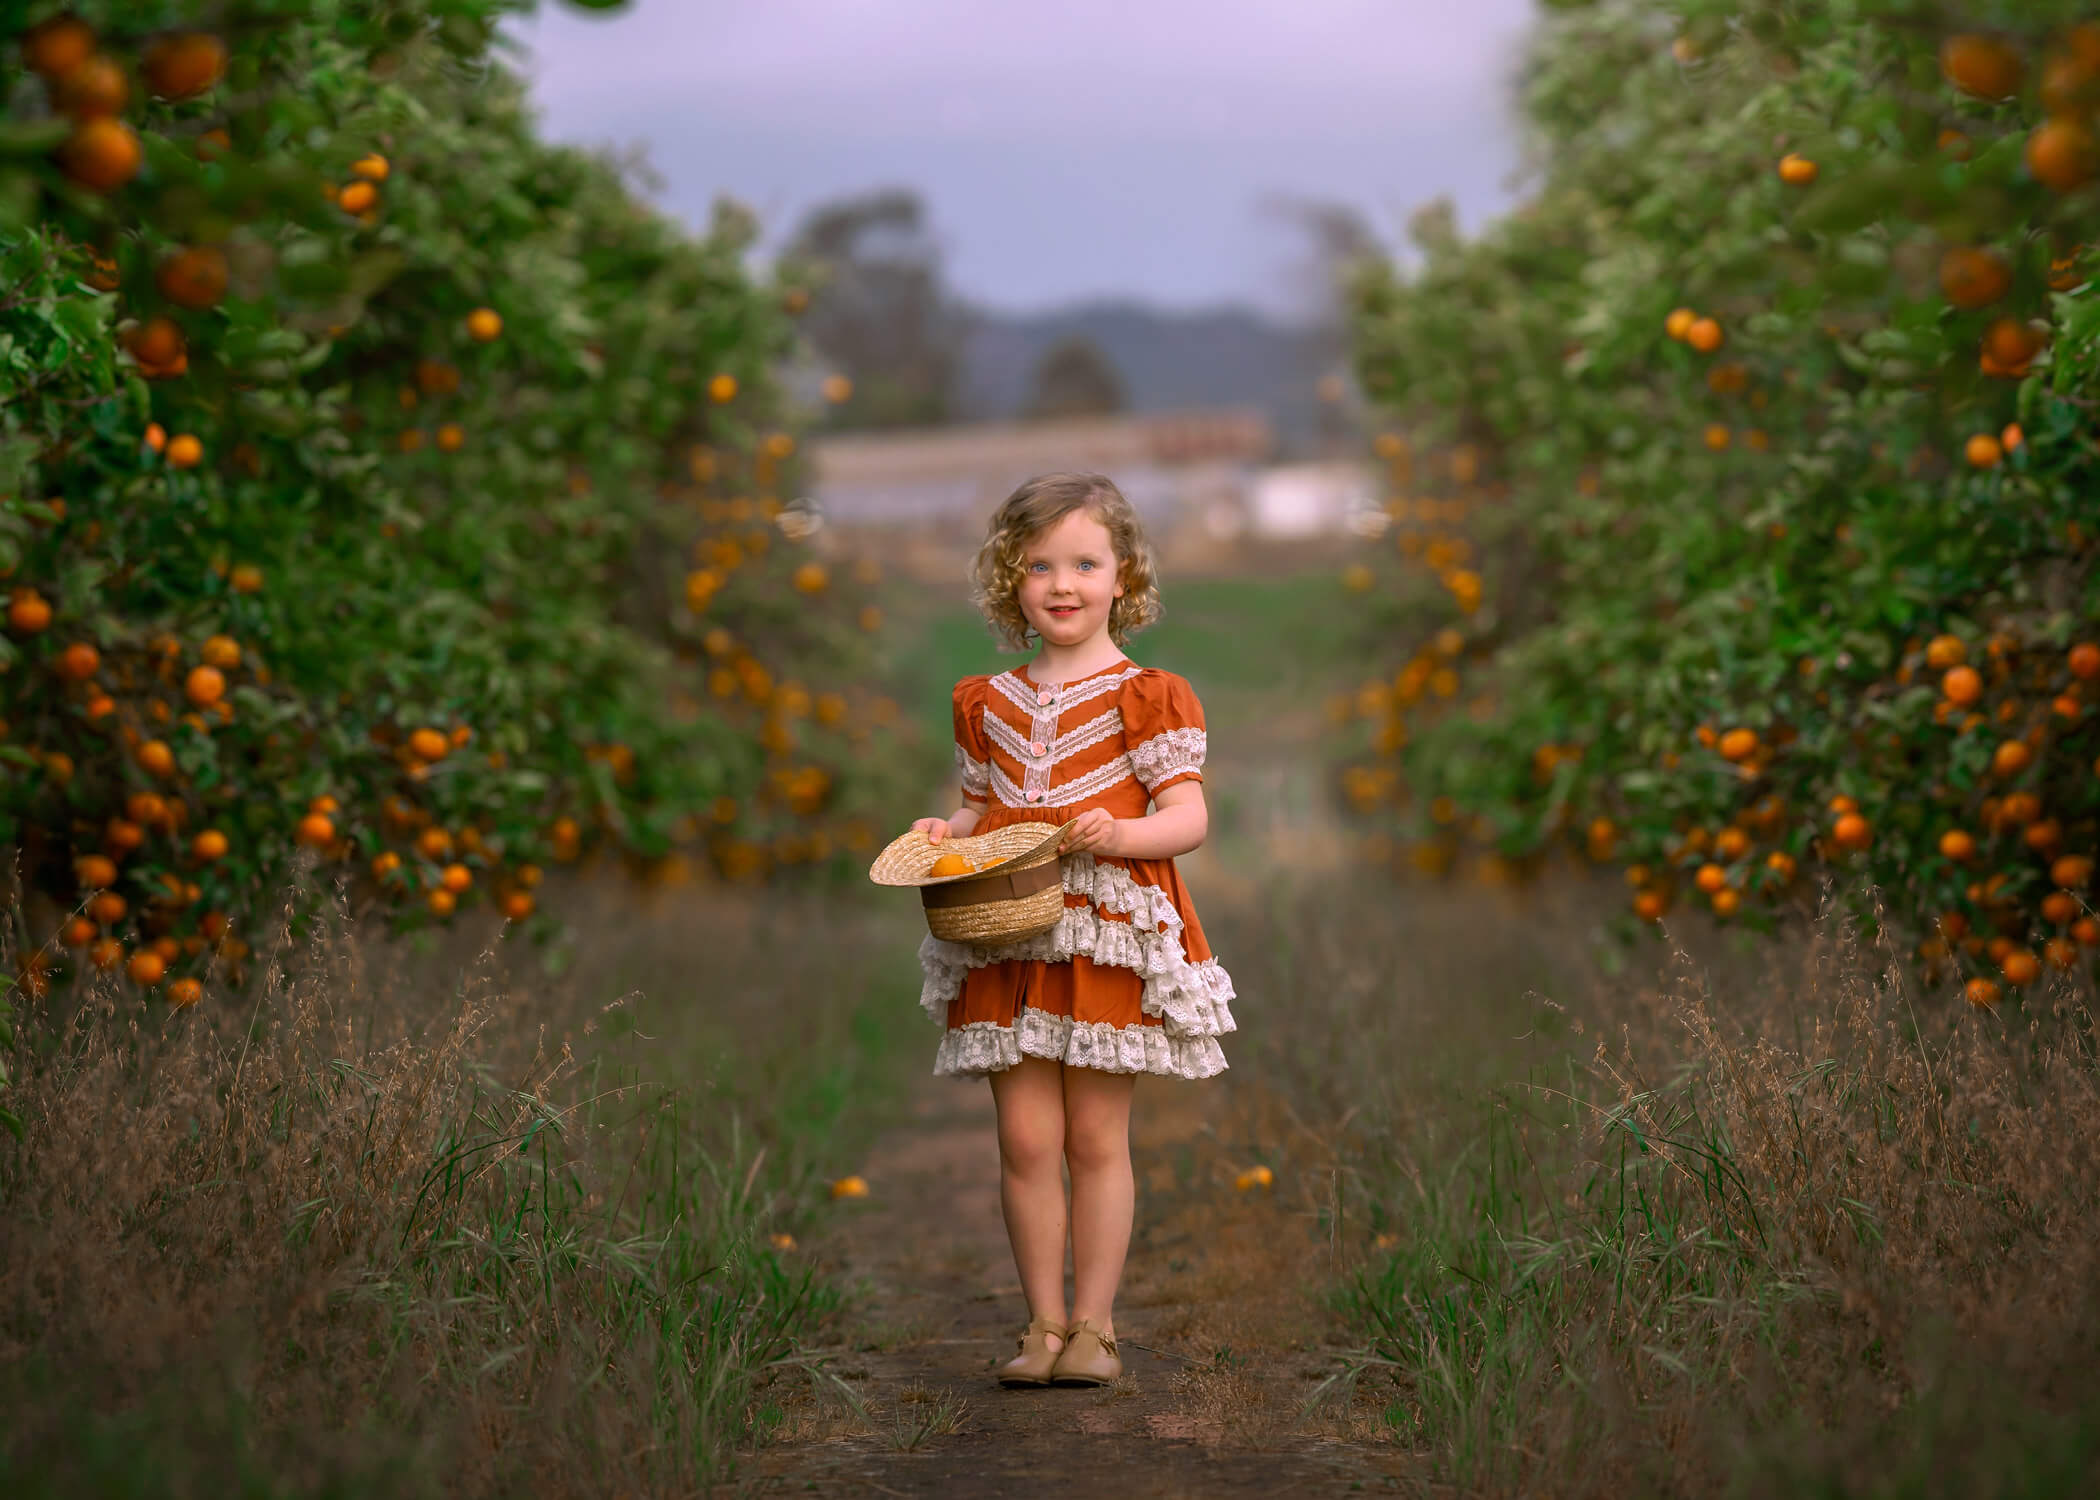 5 year old Perth girl with a basket full of oranges during photoshoot at an orange orchard